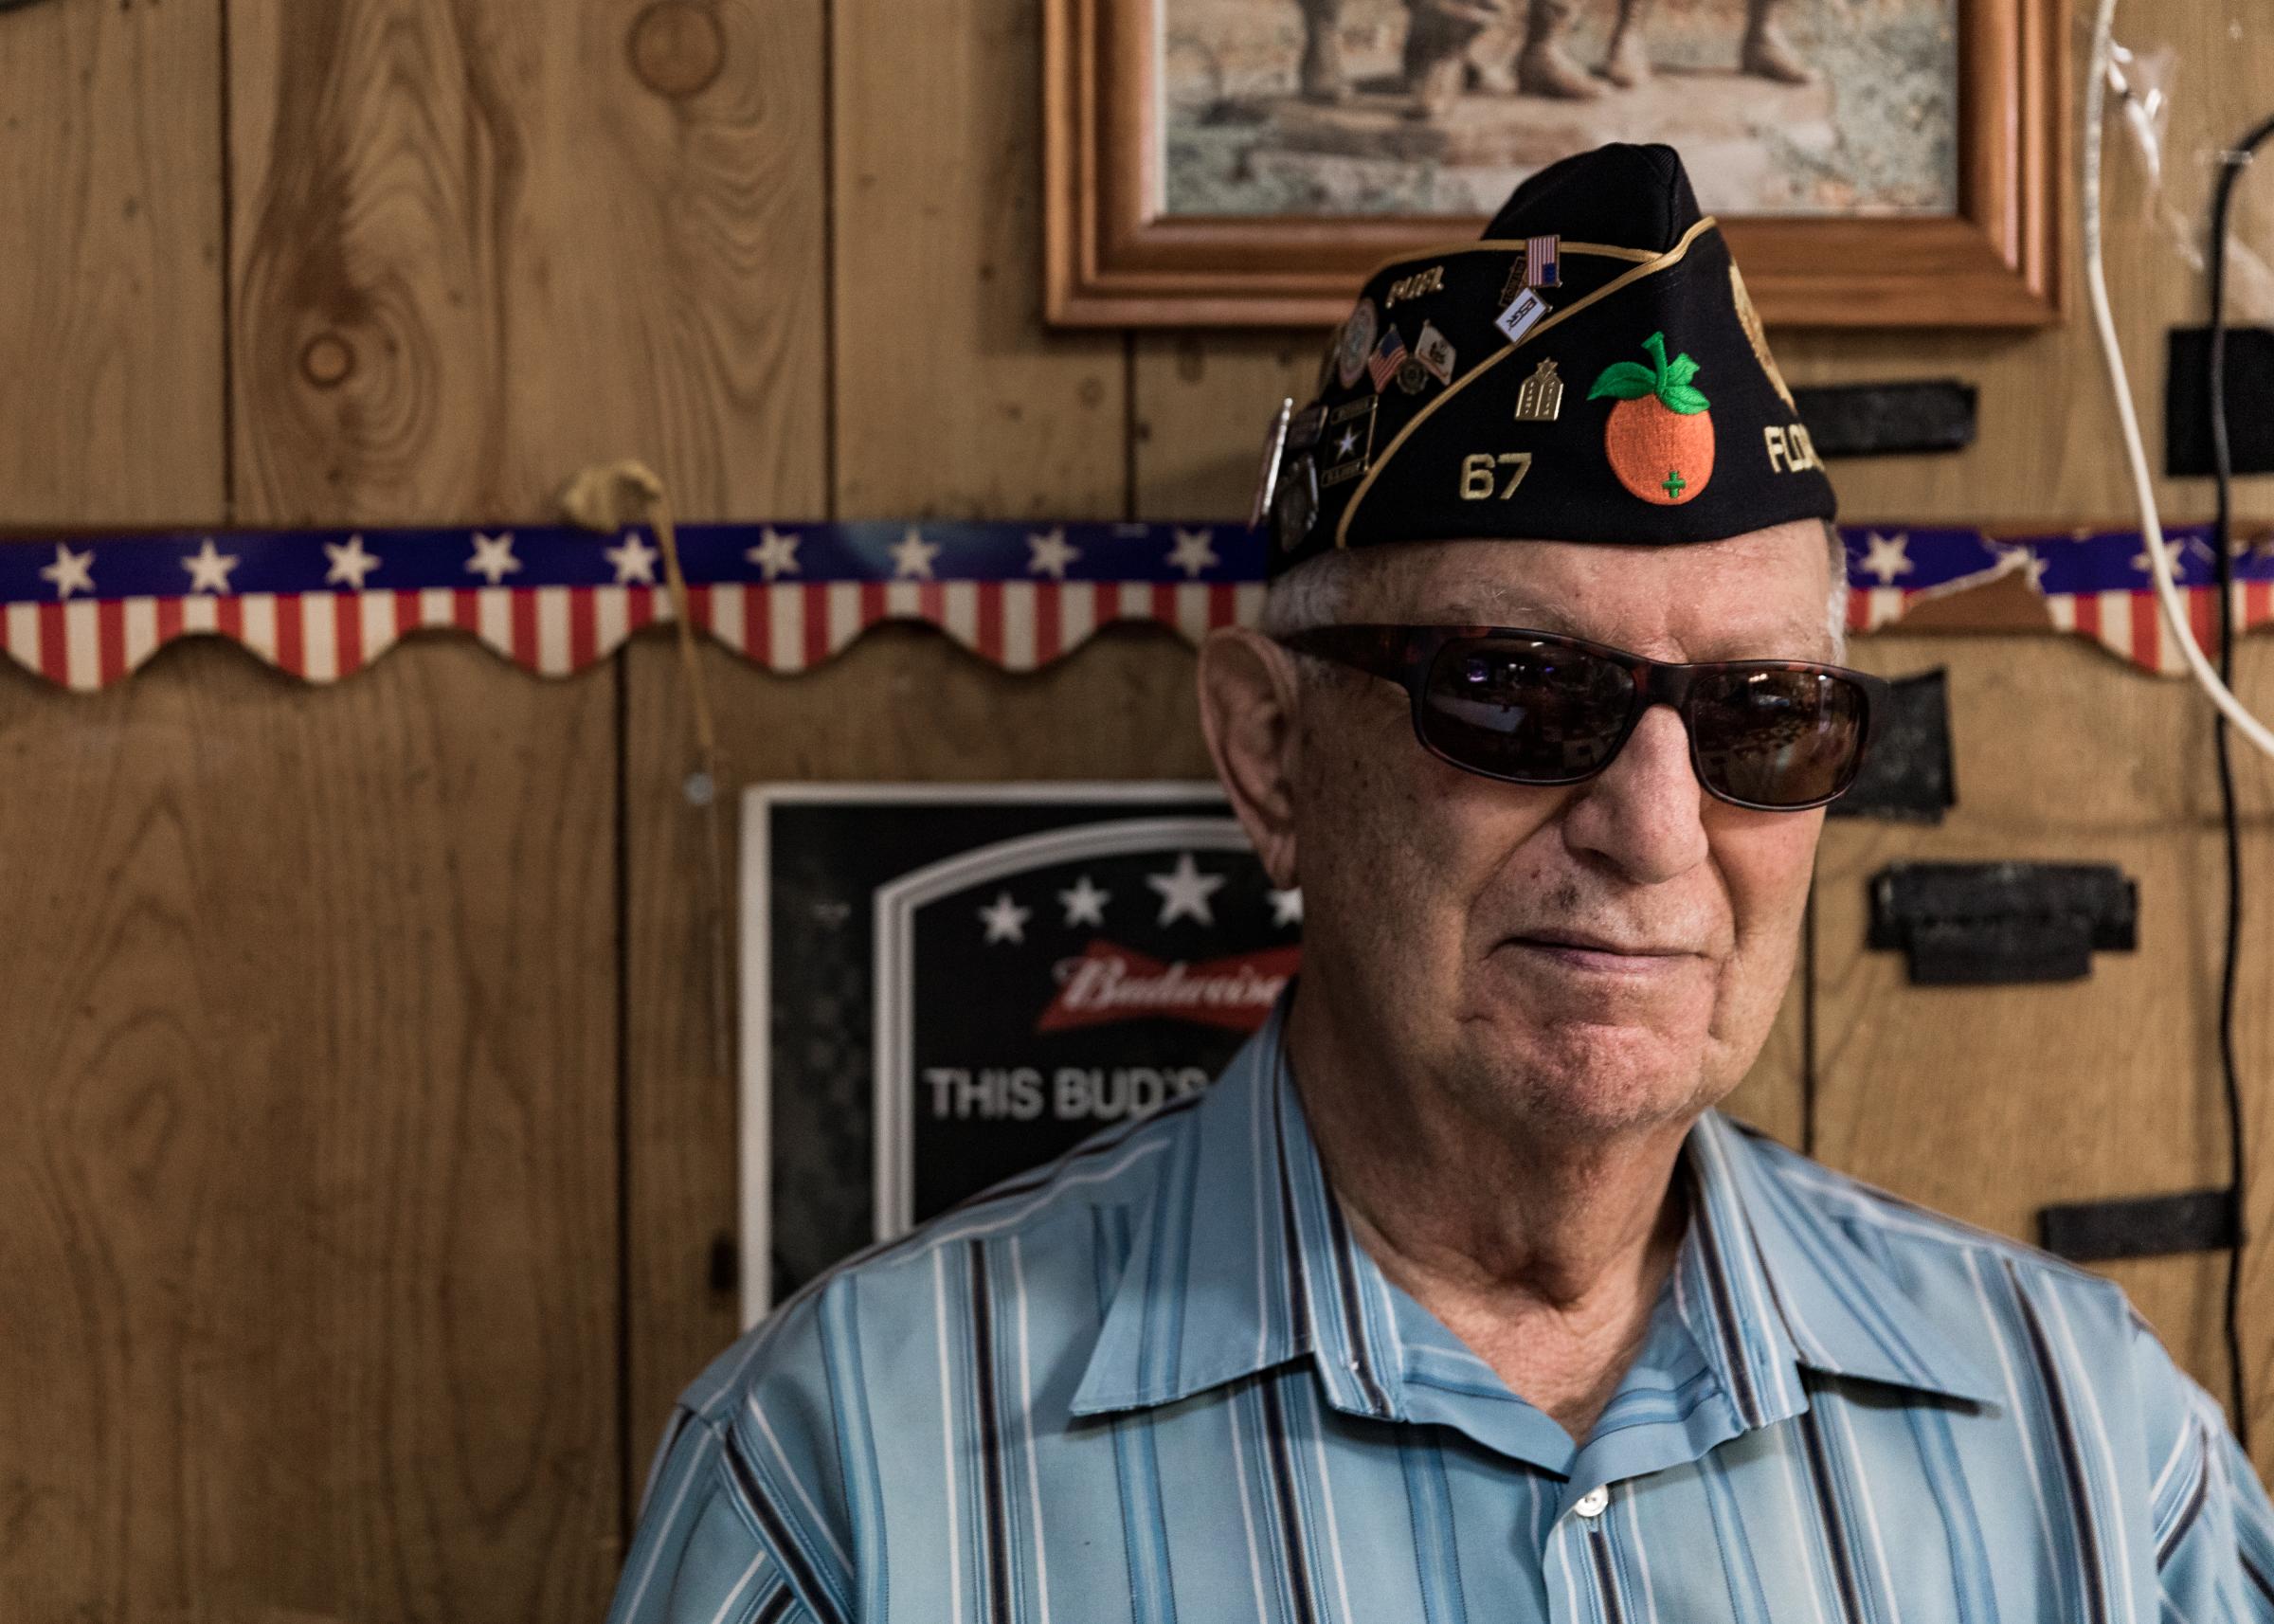 Post 67 - Ted Copeland, Legion Chaplain, fought in the Army during the Korean War.